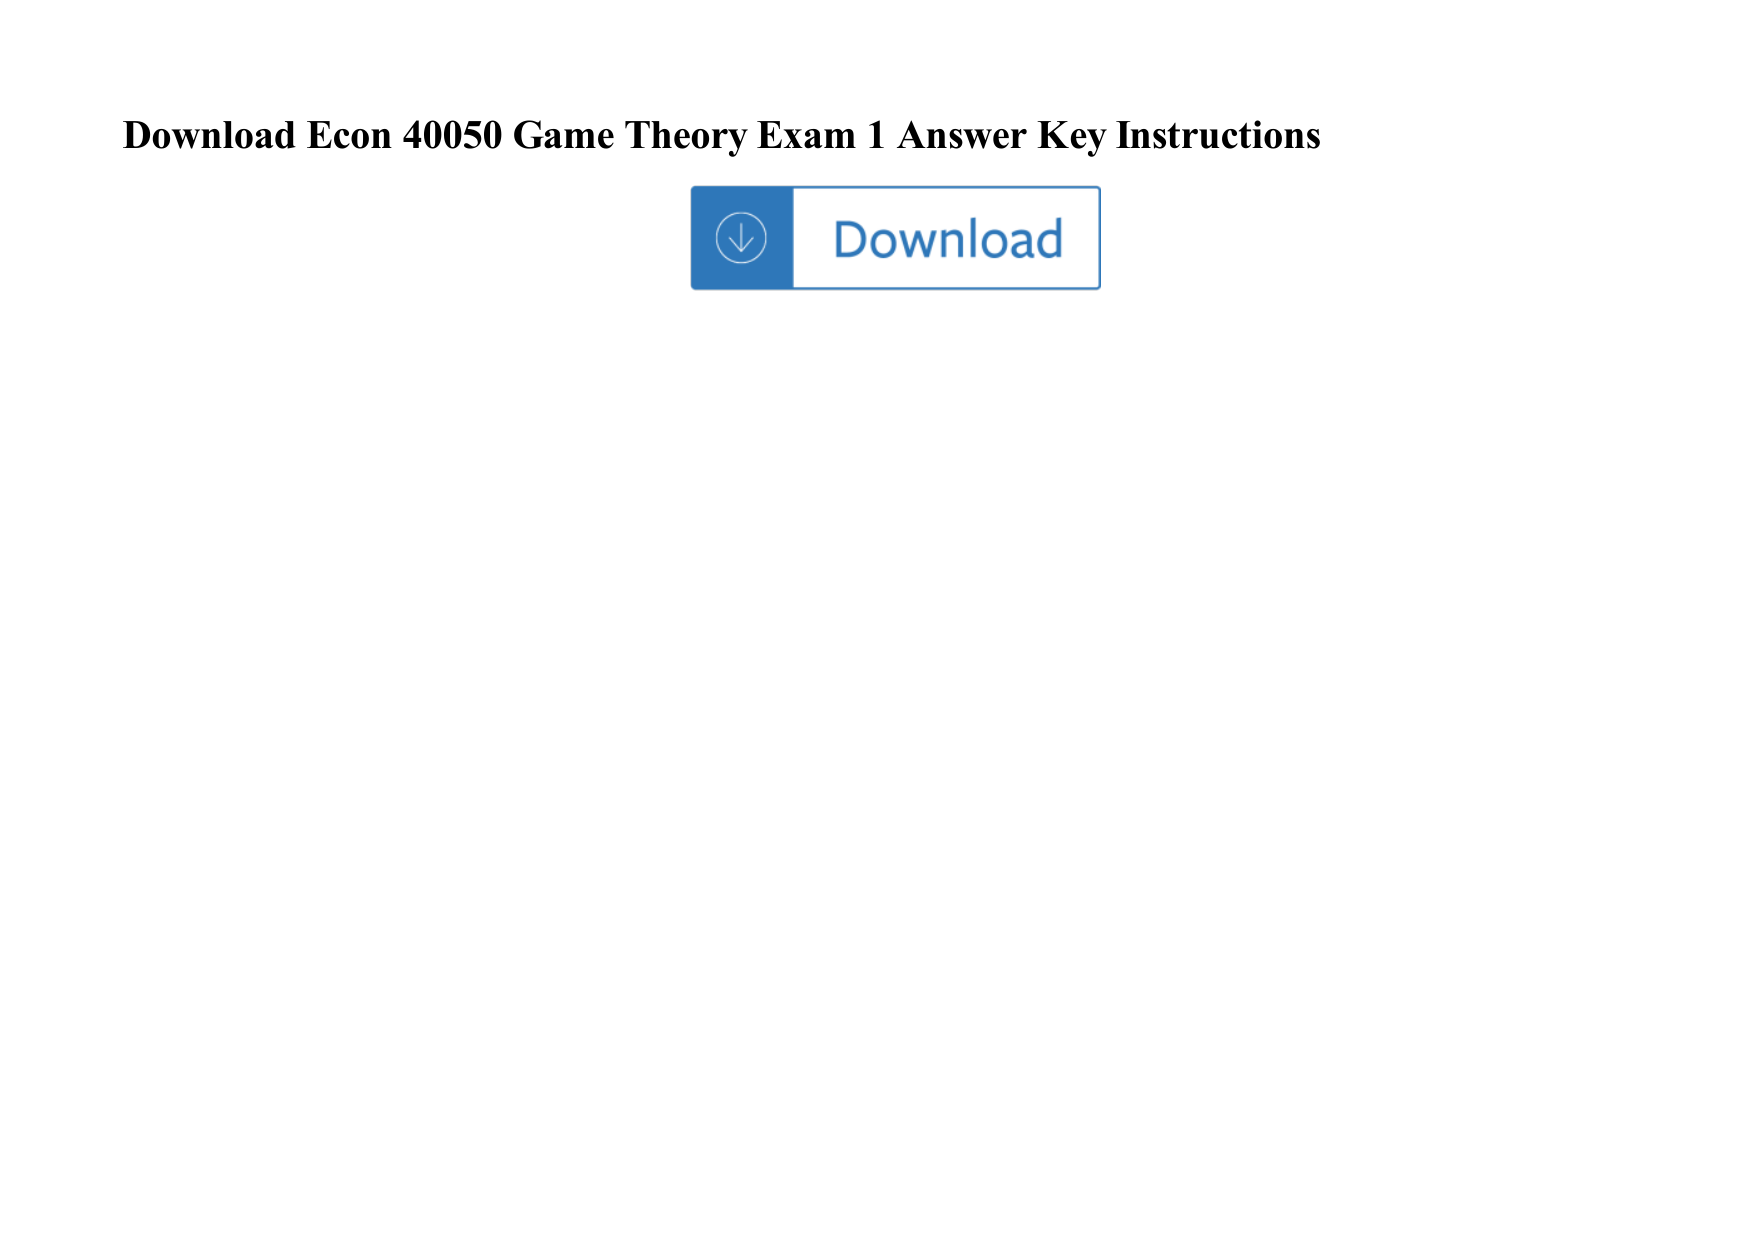 Page 1 of 1 - Econ 40050 Game Theory Exam 1 Answer Key Instructions Econ-40050-game-theory-exam-1-answer-key-instructions